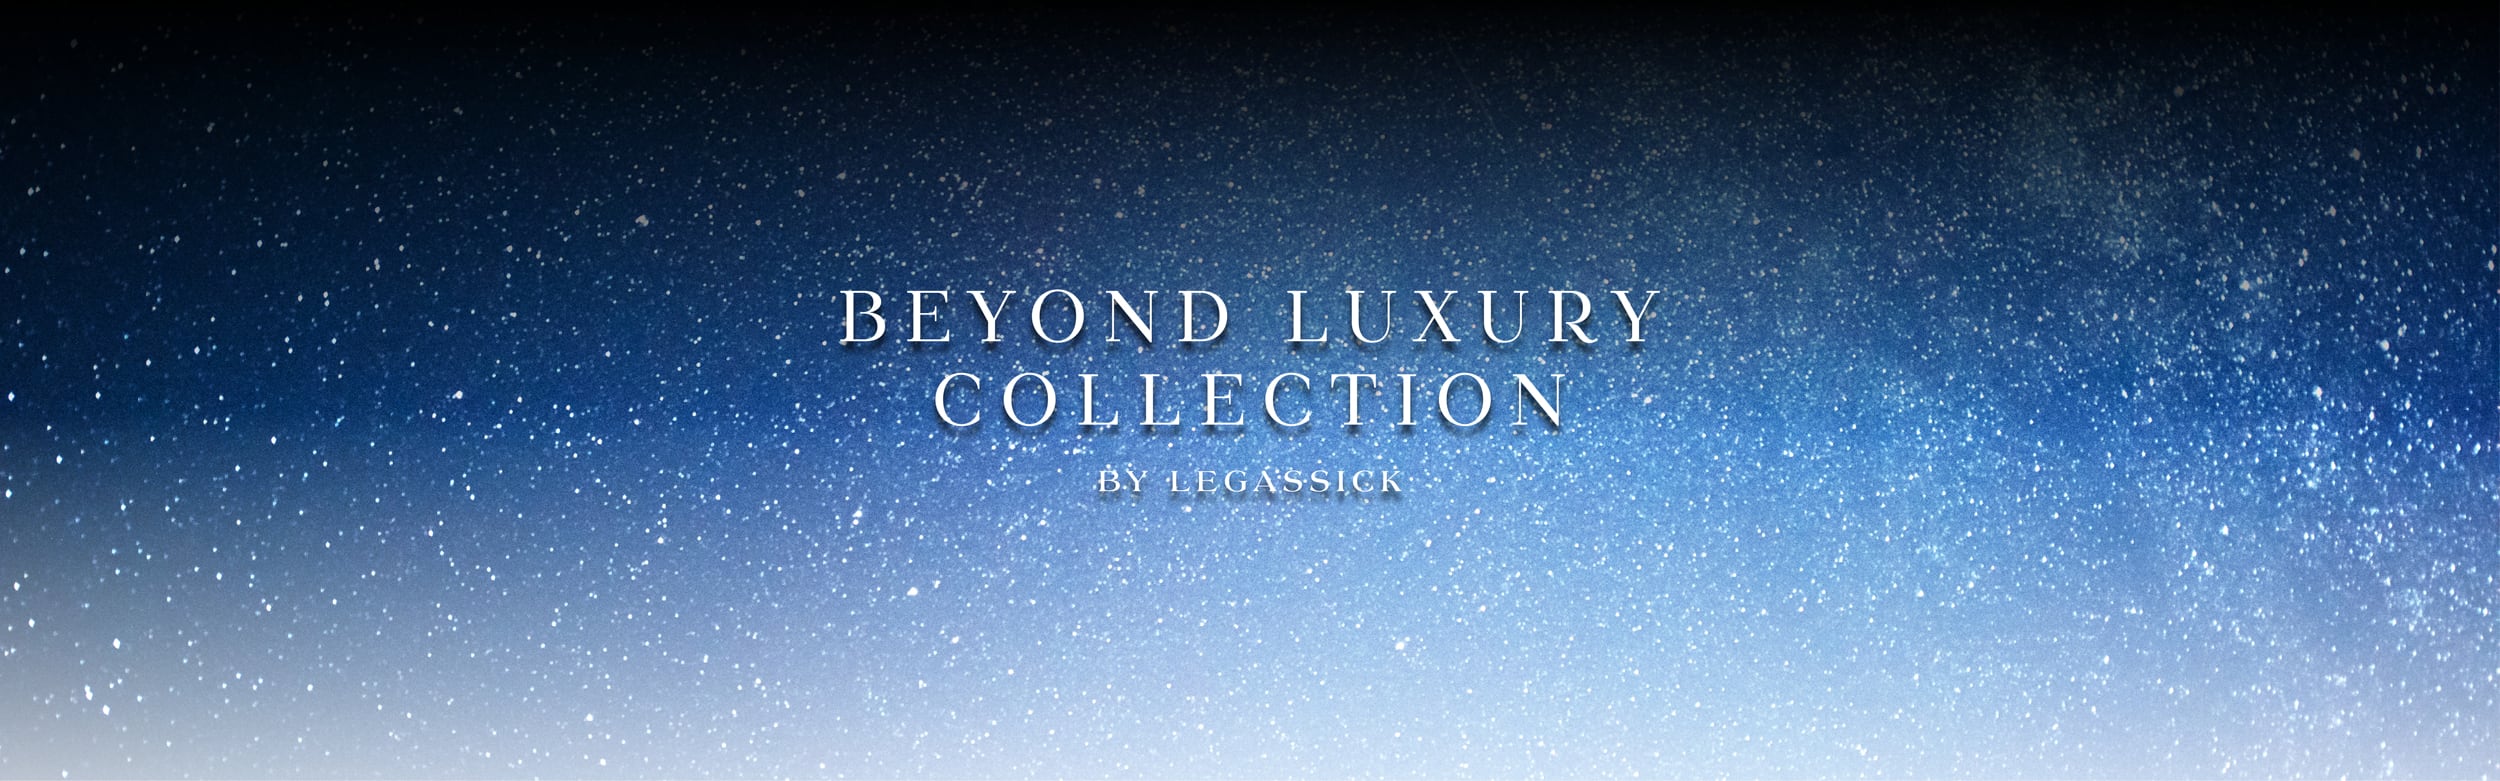 The Beyond Luxury Collection by LeGassick is the ultimate in bespoke fine high jewellery.